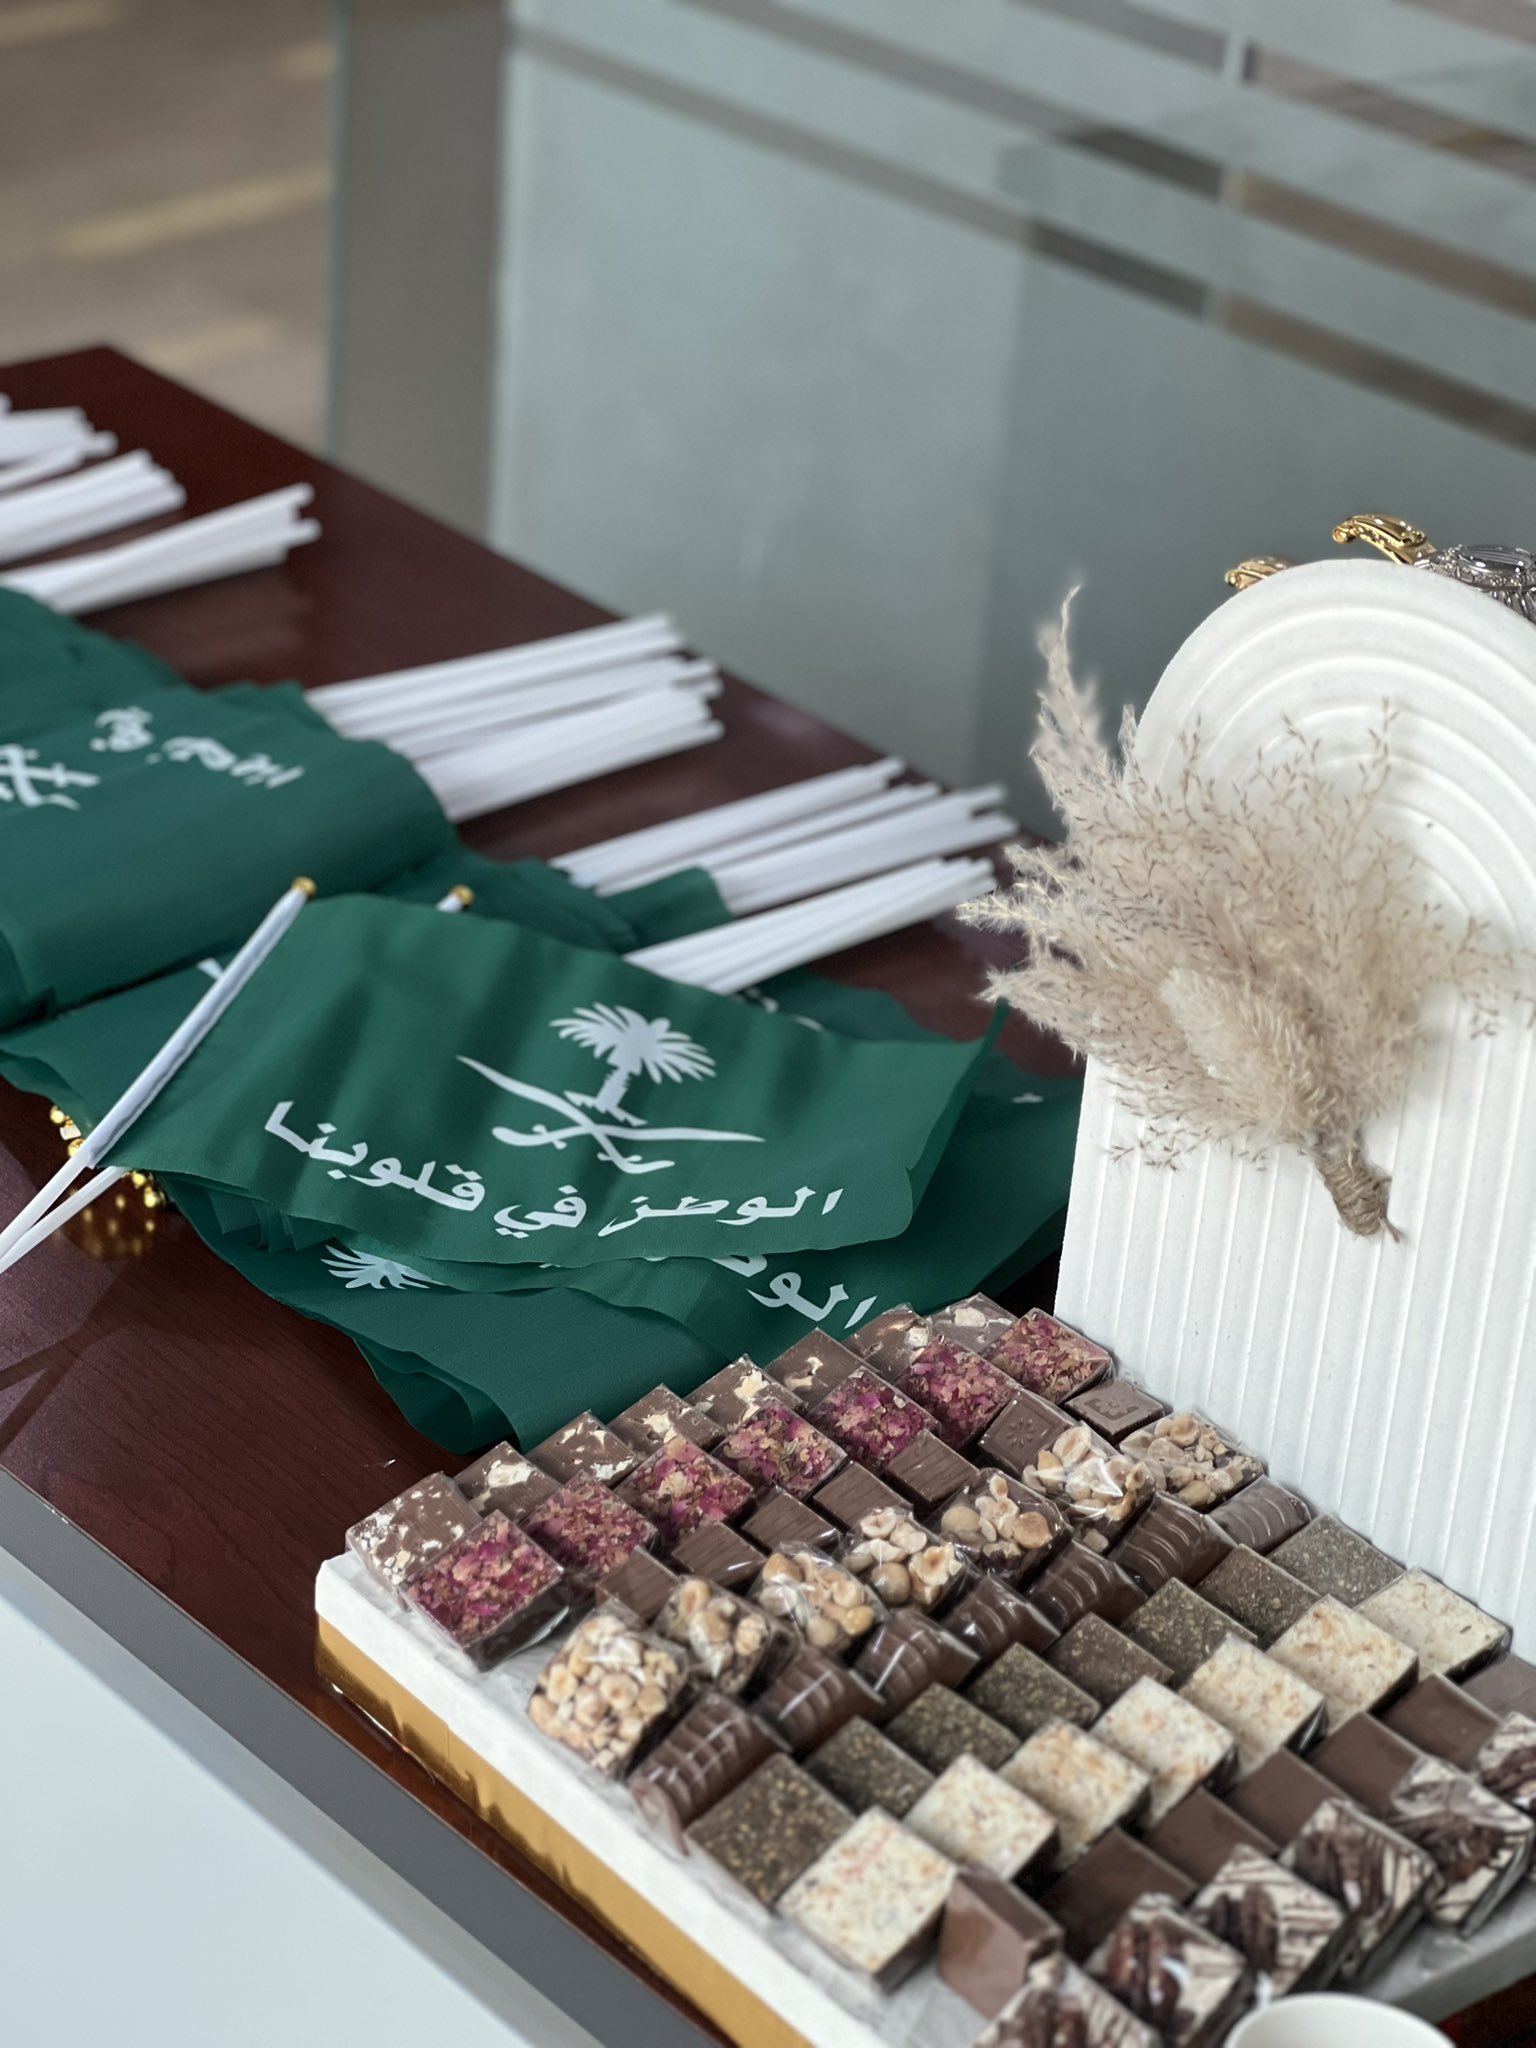 The Student Activities Unit at the College of Education in Al-Kharj celebrates the Flag Day